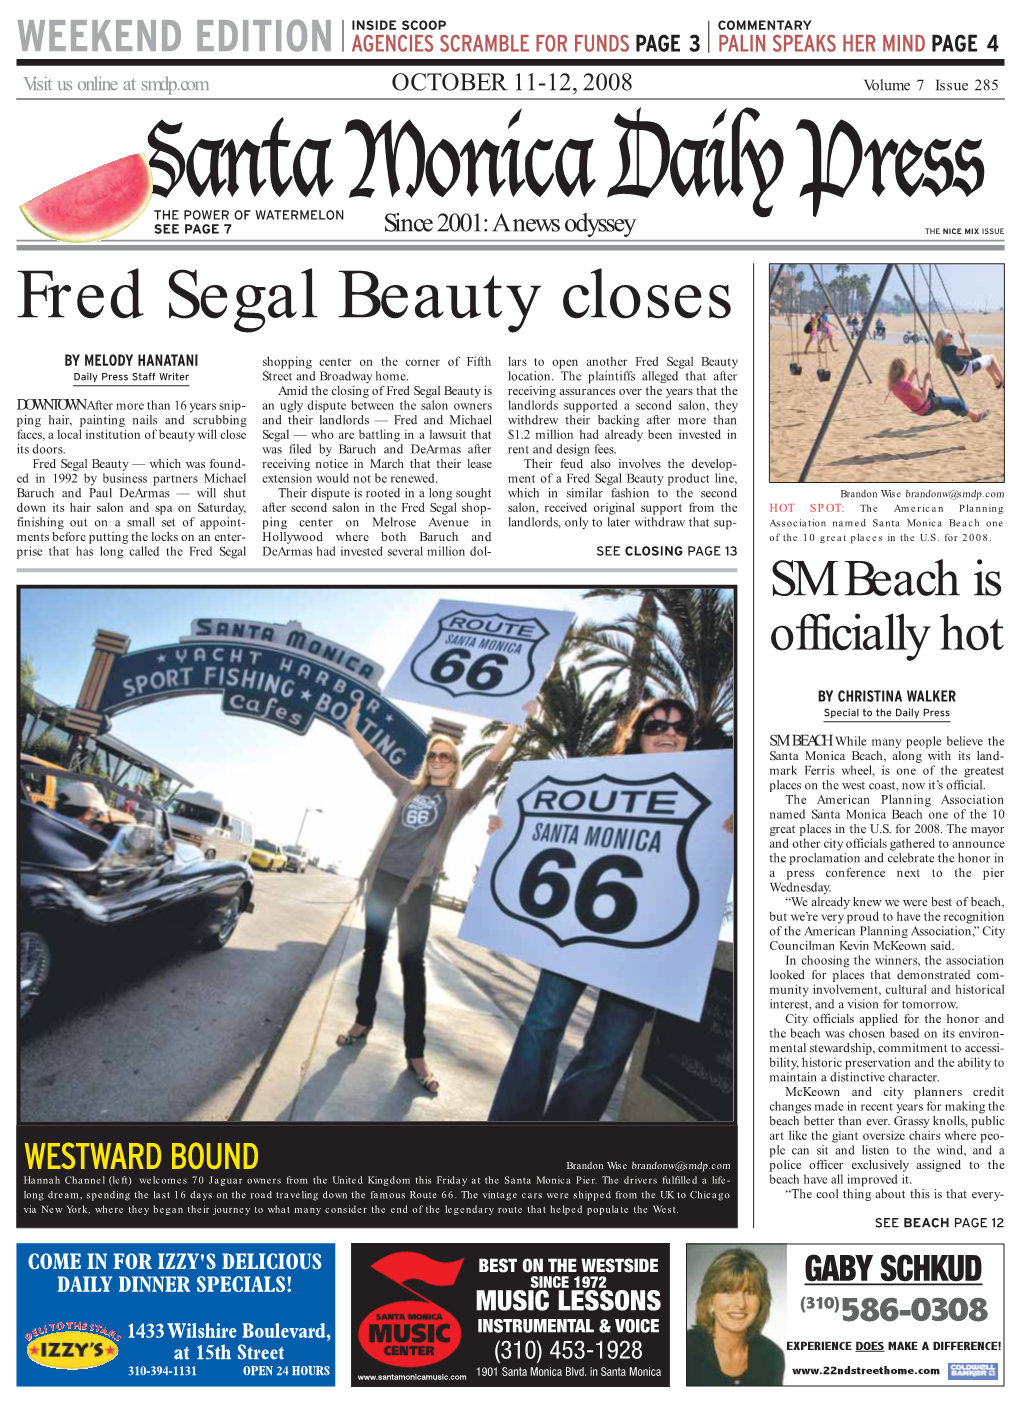 Fred Segal Beauty Closes